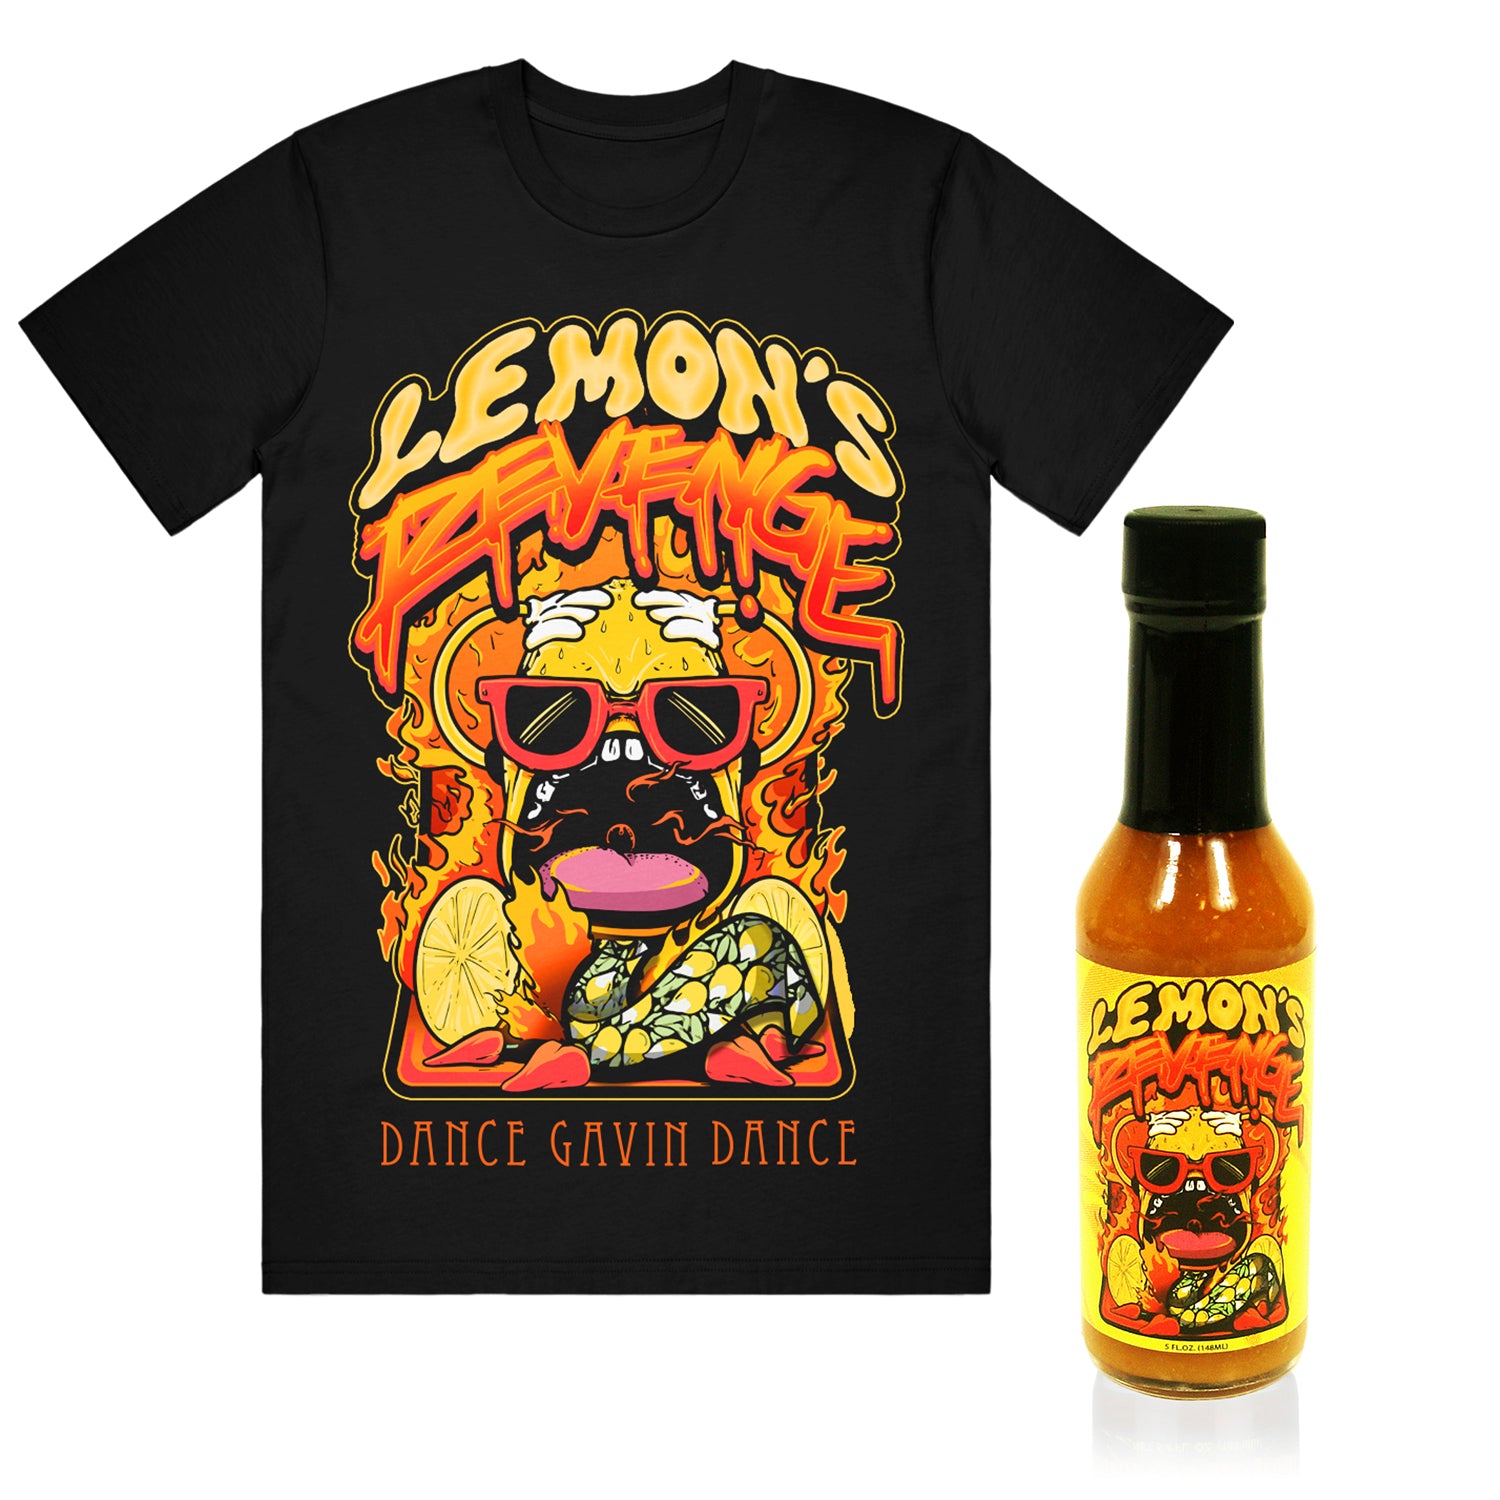 image of a black tee shirt and hot sauce bottle. tee has full body print that says lemon's revenge dance gavin dance with a lemon head wearing sunglasses surrounded by fire. hot sauce says label says lemon's revenge with a lemon wearing sunglasses surrounded by fire